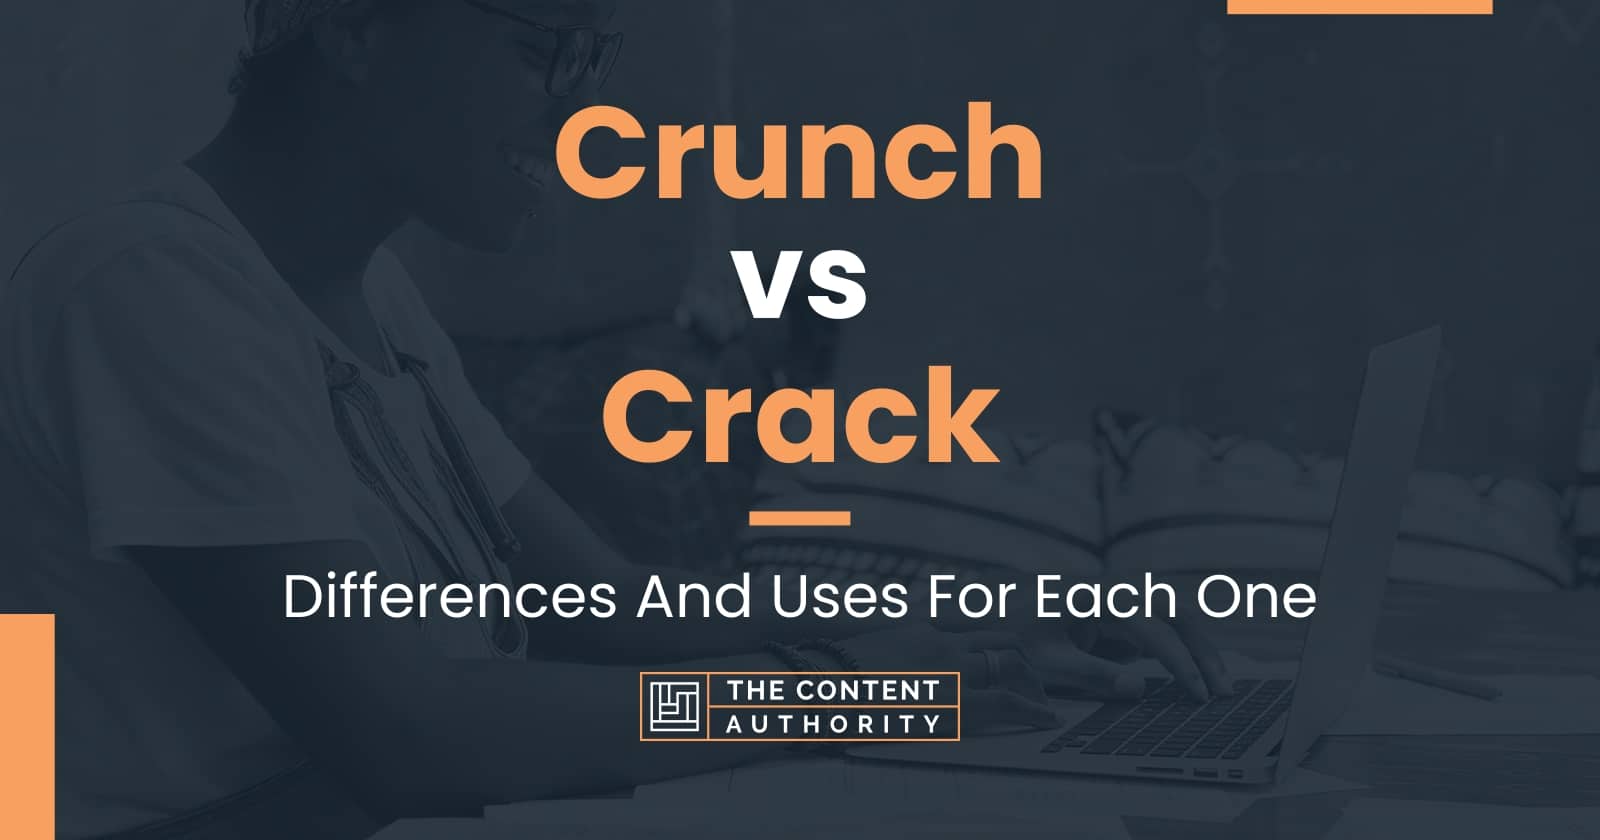 Crunch vs Crack: Differences And Uses For Each One